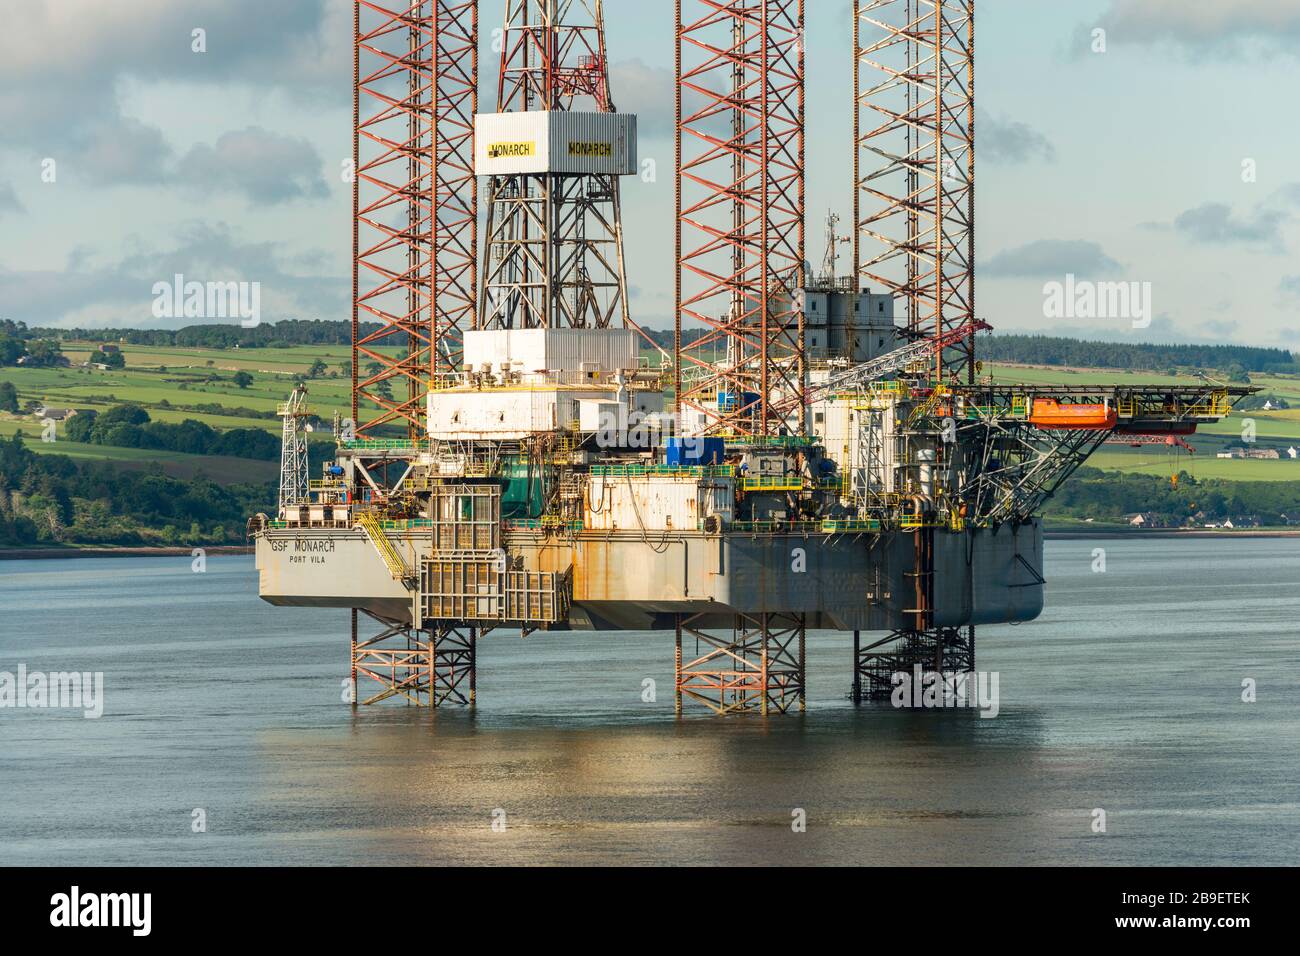 GSF Monarch (1986) is an offshore oil drilling platform, laid up in the Cromarty Firth, Scotland, UK, 2016. Stock Photo